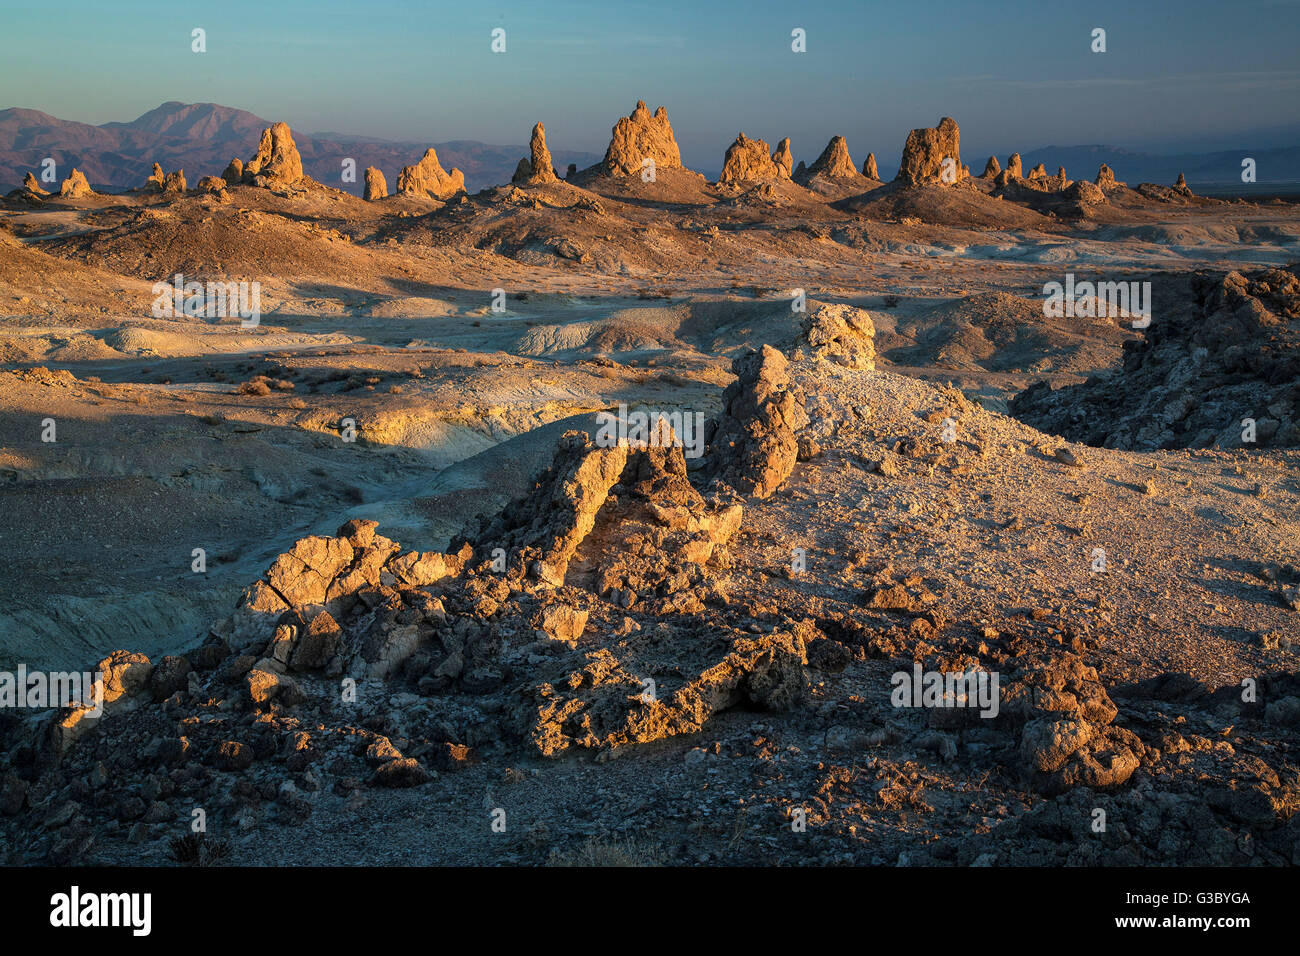 Unusual geologic tufa formations known as Trona Pinnacles rising from the California Desert National Conservation Area at the Searles Dry Lake basin in Trona, California. Stock Photo